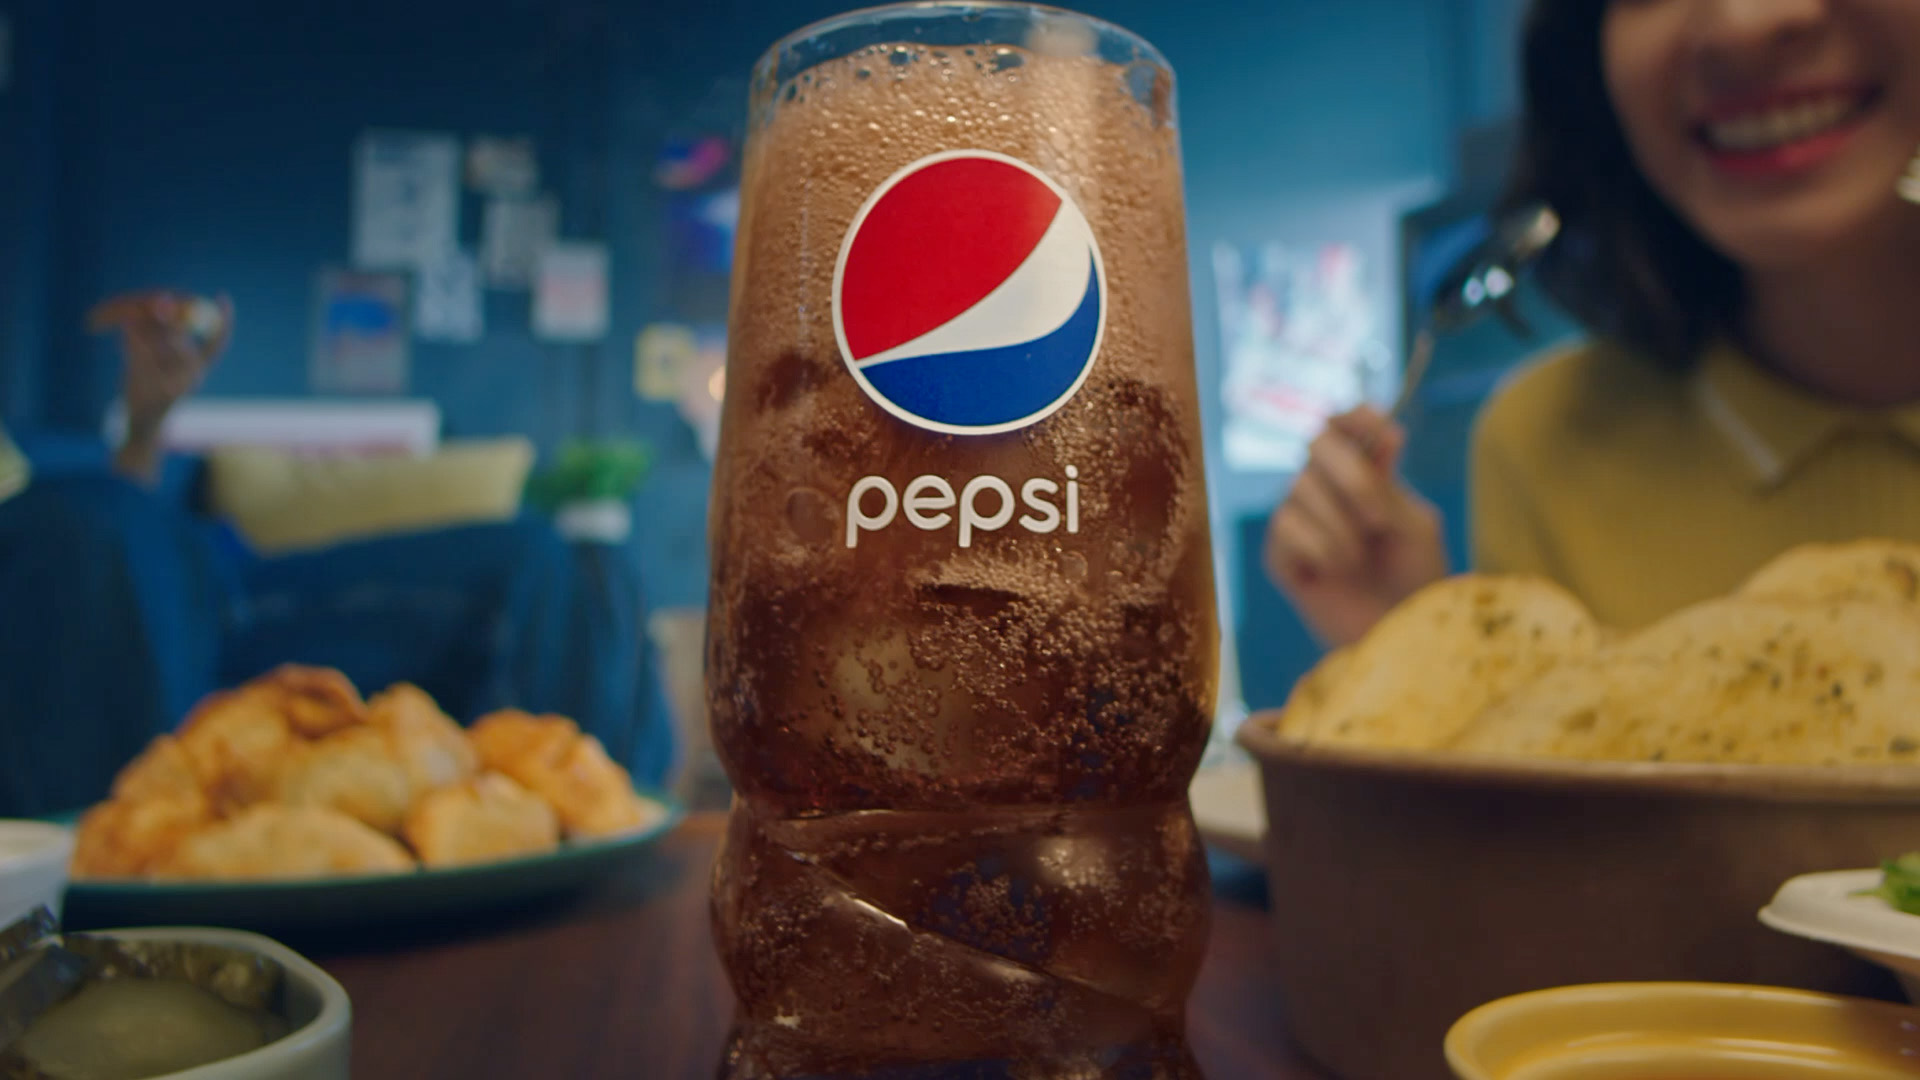 Pepsi_This-is-a-pepsi-home-02